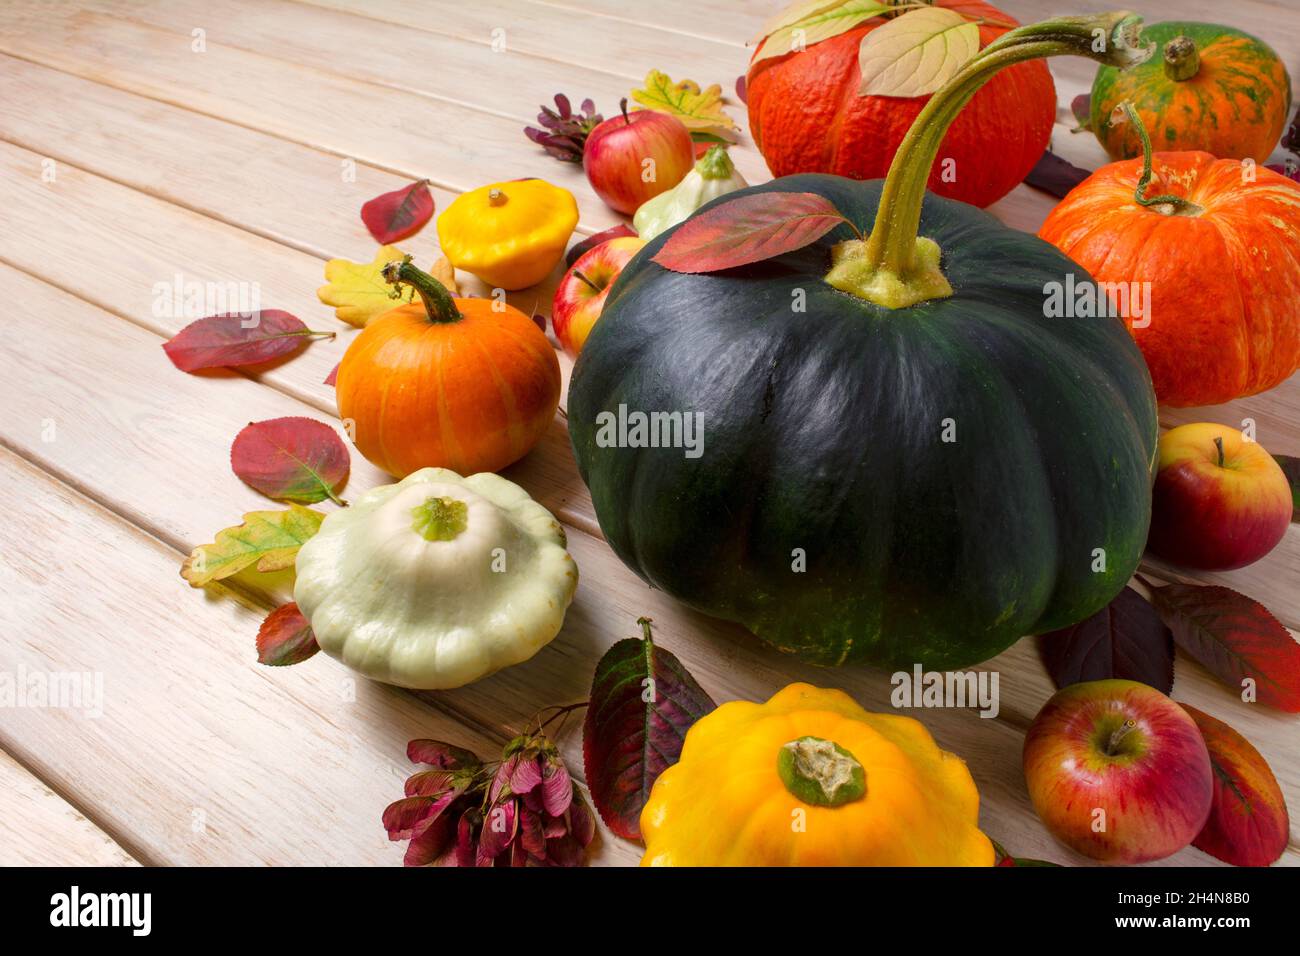 Thanksgiving rustic arrangement with green and orange pumpkins, red leaves on the white wooden table Stock Photo